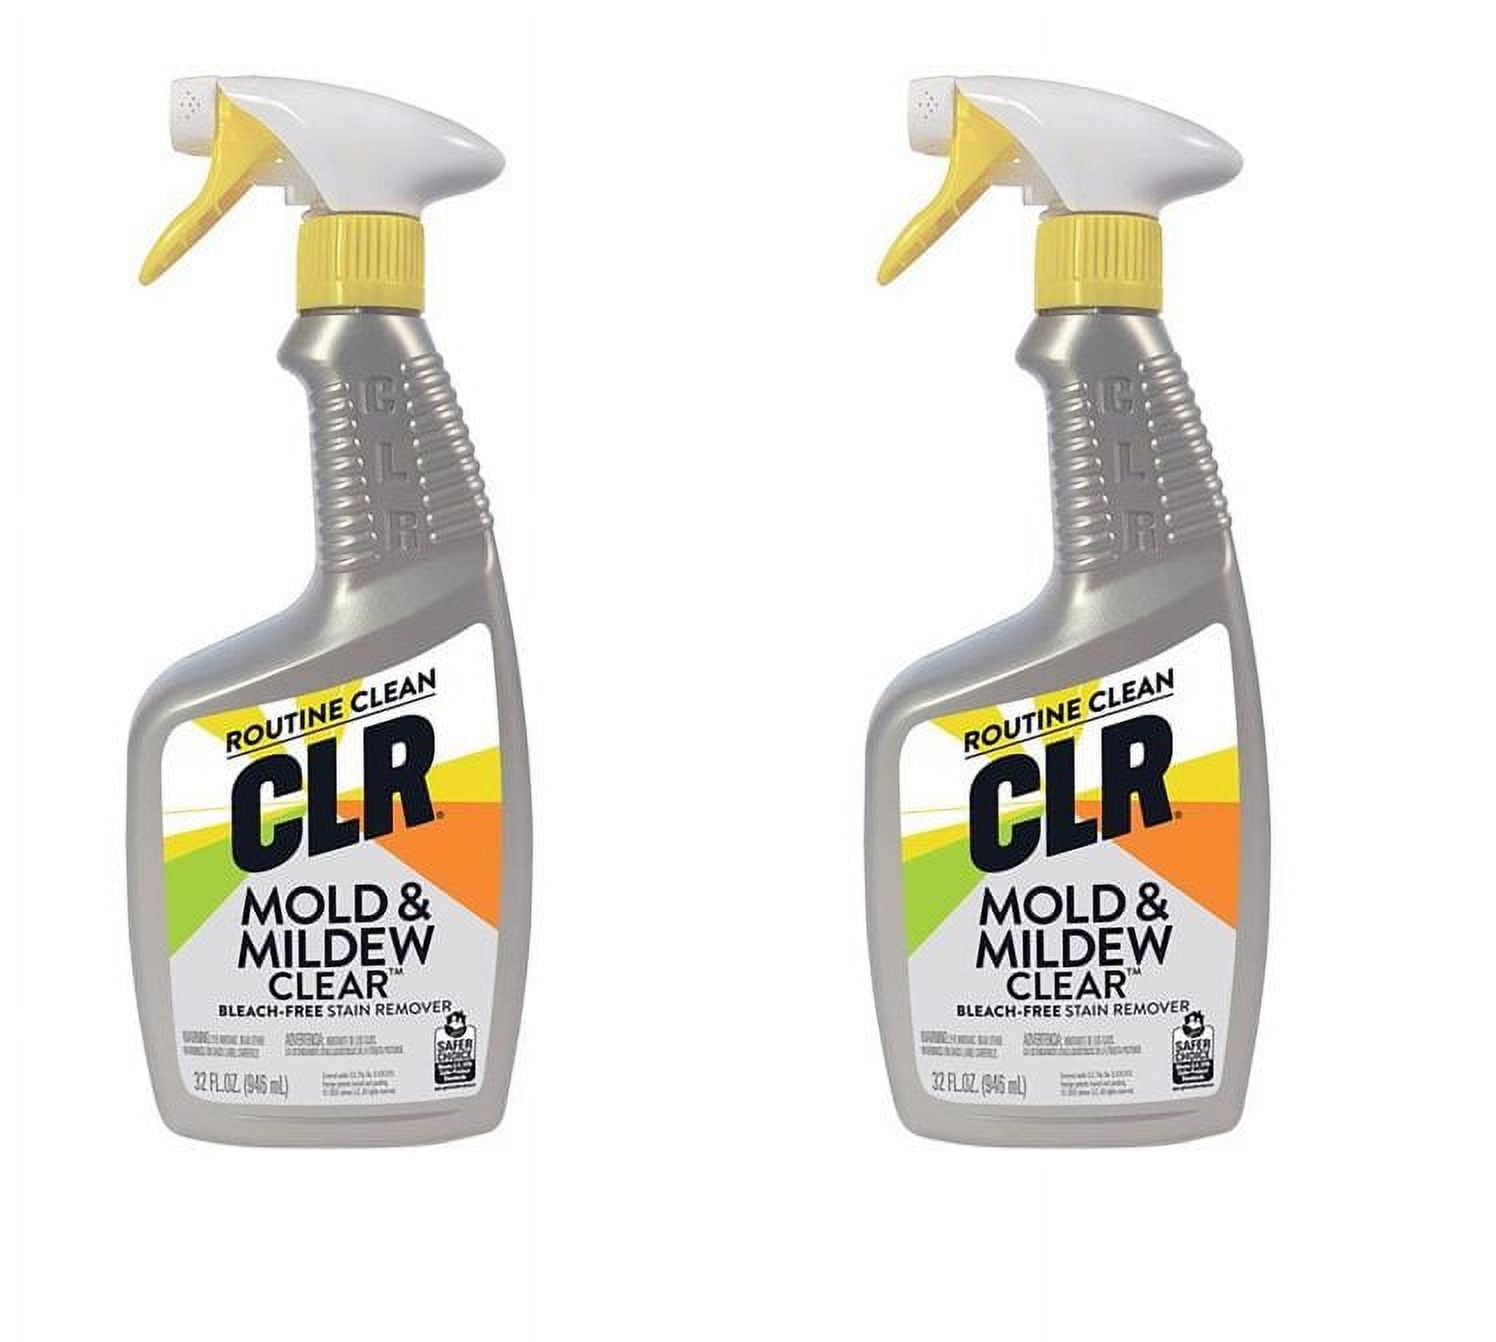 Clr Pb-cmm-6 Mold and Mildew Stain Remover, 32 oz. Spray Bottle(Pack of 2)